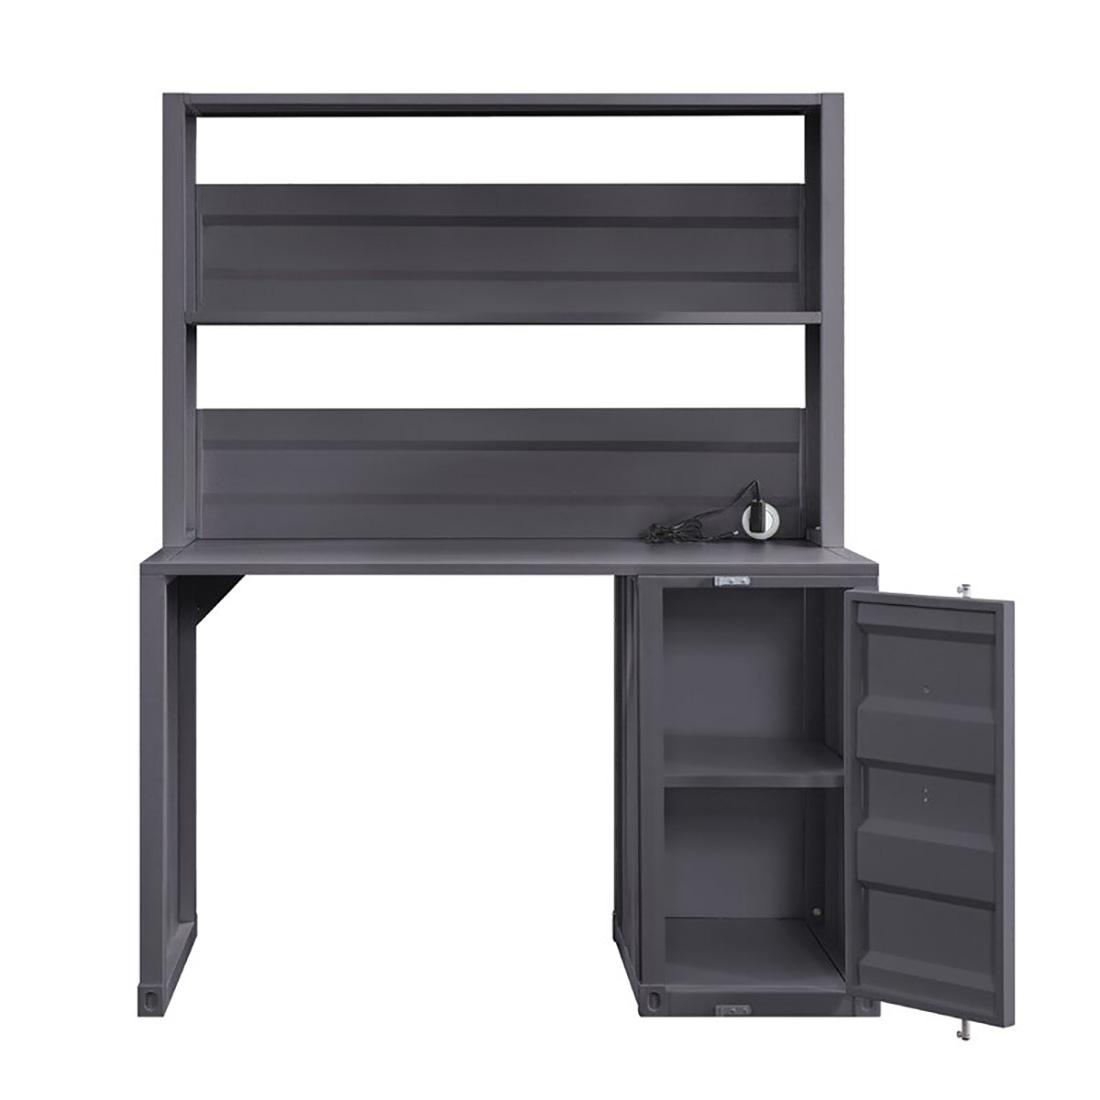 https://nyfurnitureoutlets.com/products/contemporary-gunmetal-metal-cargo-desk-hutch-chair-by-acme-cargo-37897-2pcs/1x1/389614-4-018148768301.jpg